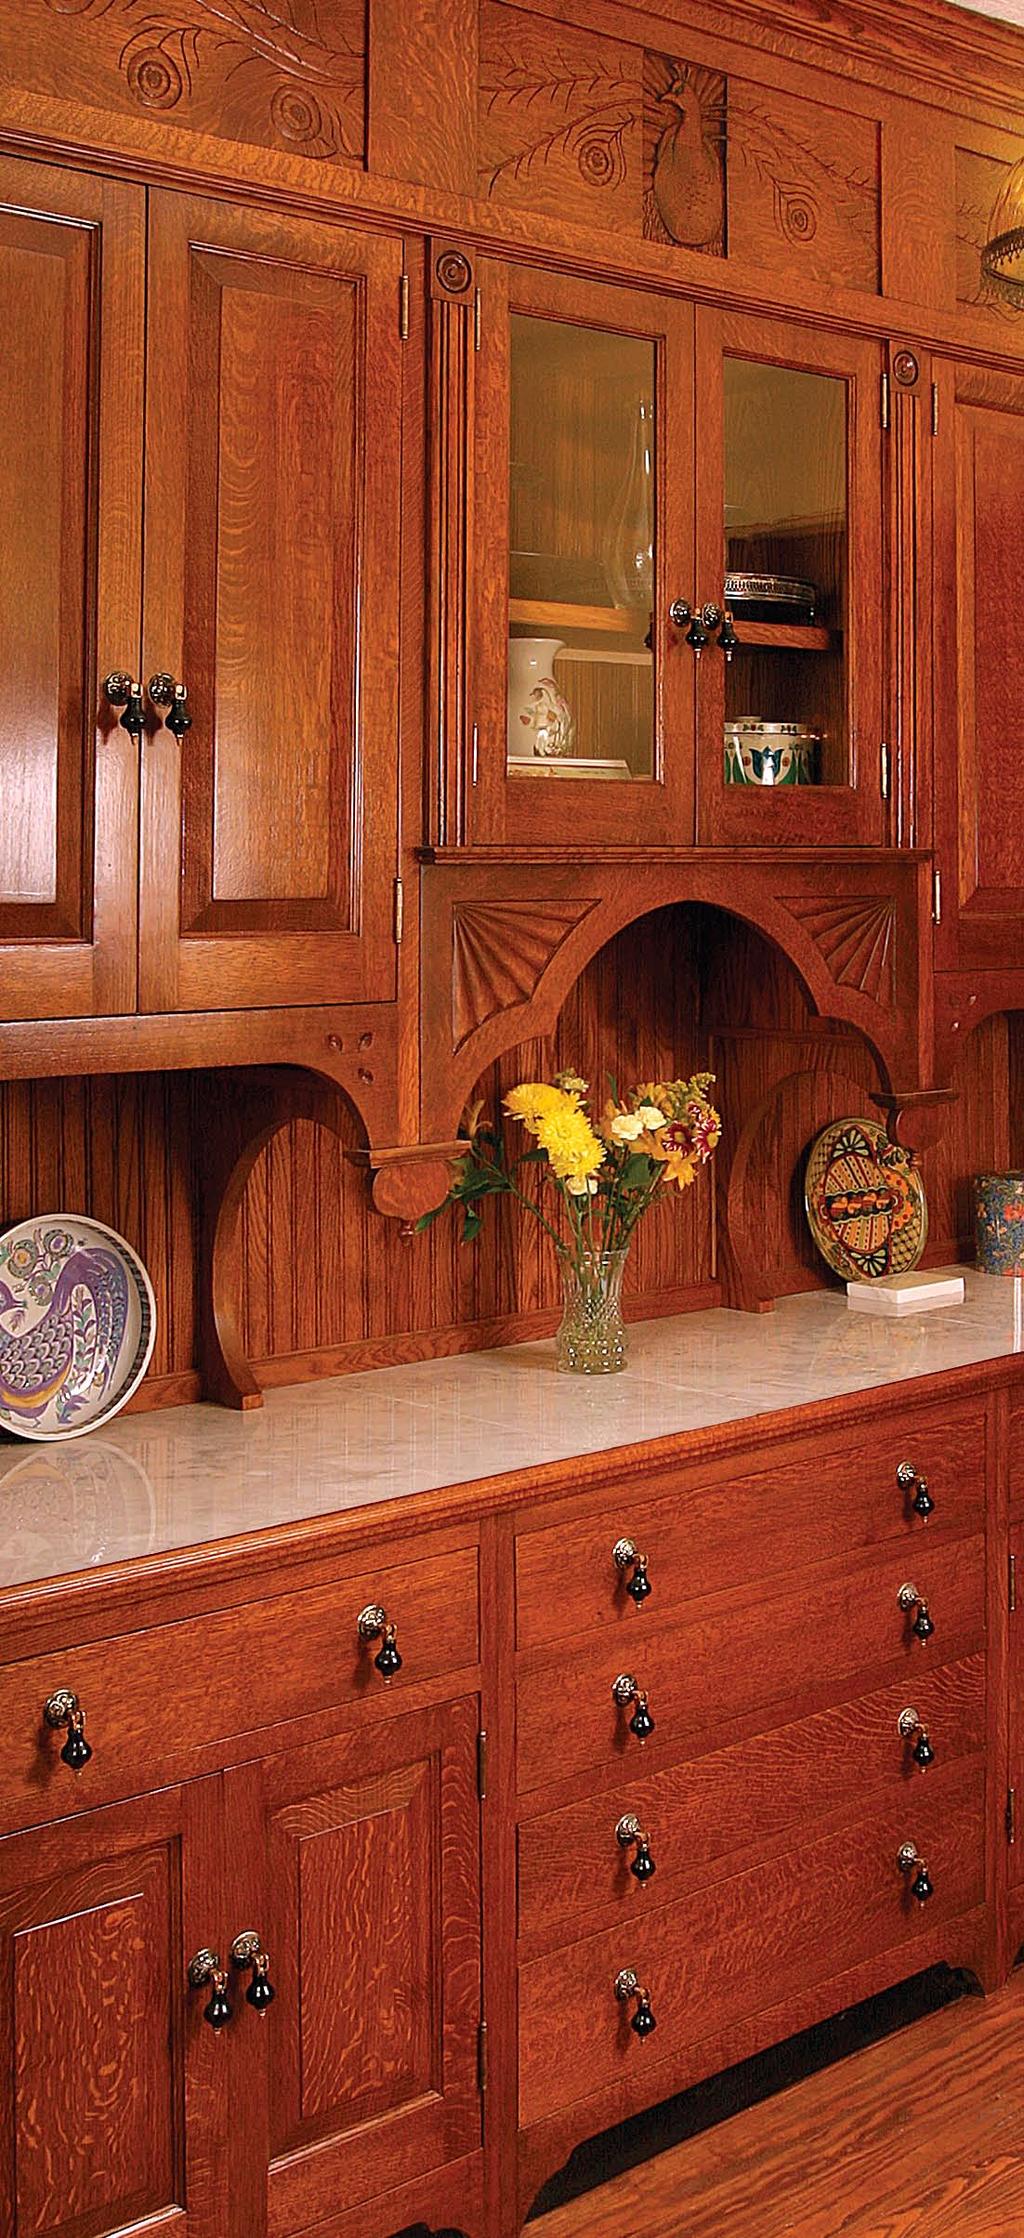 spaces in older cabinetry. Flush kicks are simply an extension of the cabinet s face frame down to the floor.